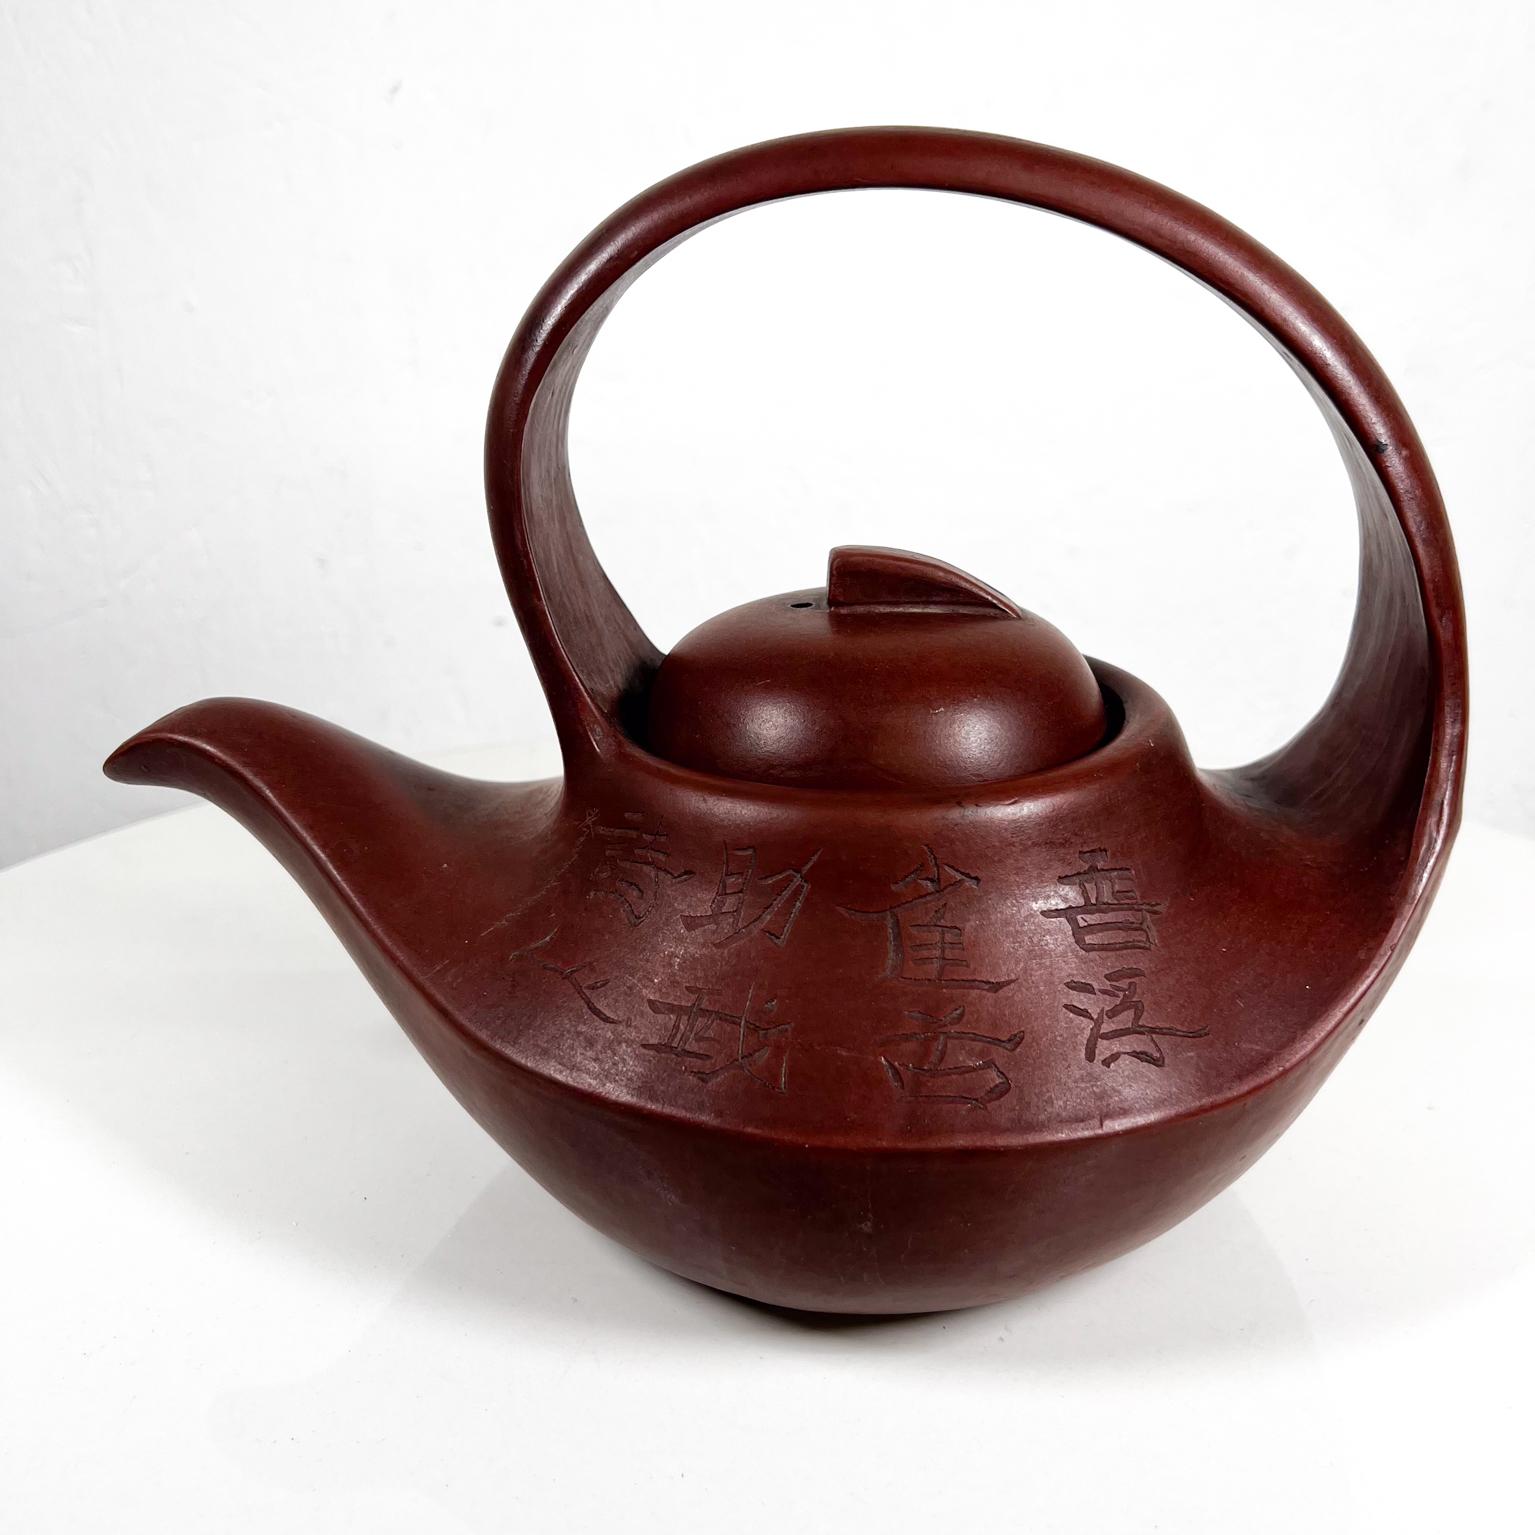 Yixing Zisha Teapot Pottery Curved Body Loop Handle
Stamps symbols present
11 long x 7 d x 8.5 h
Preowned vintage condition.
Review all images please.